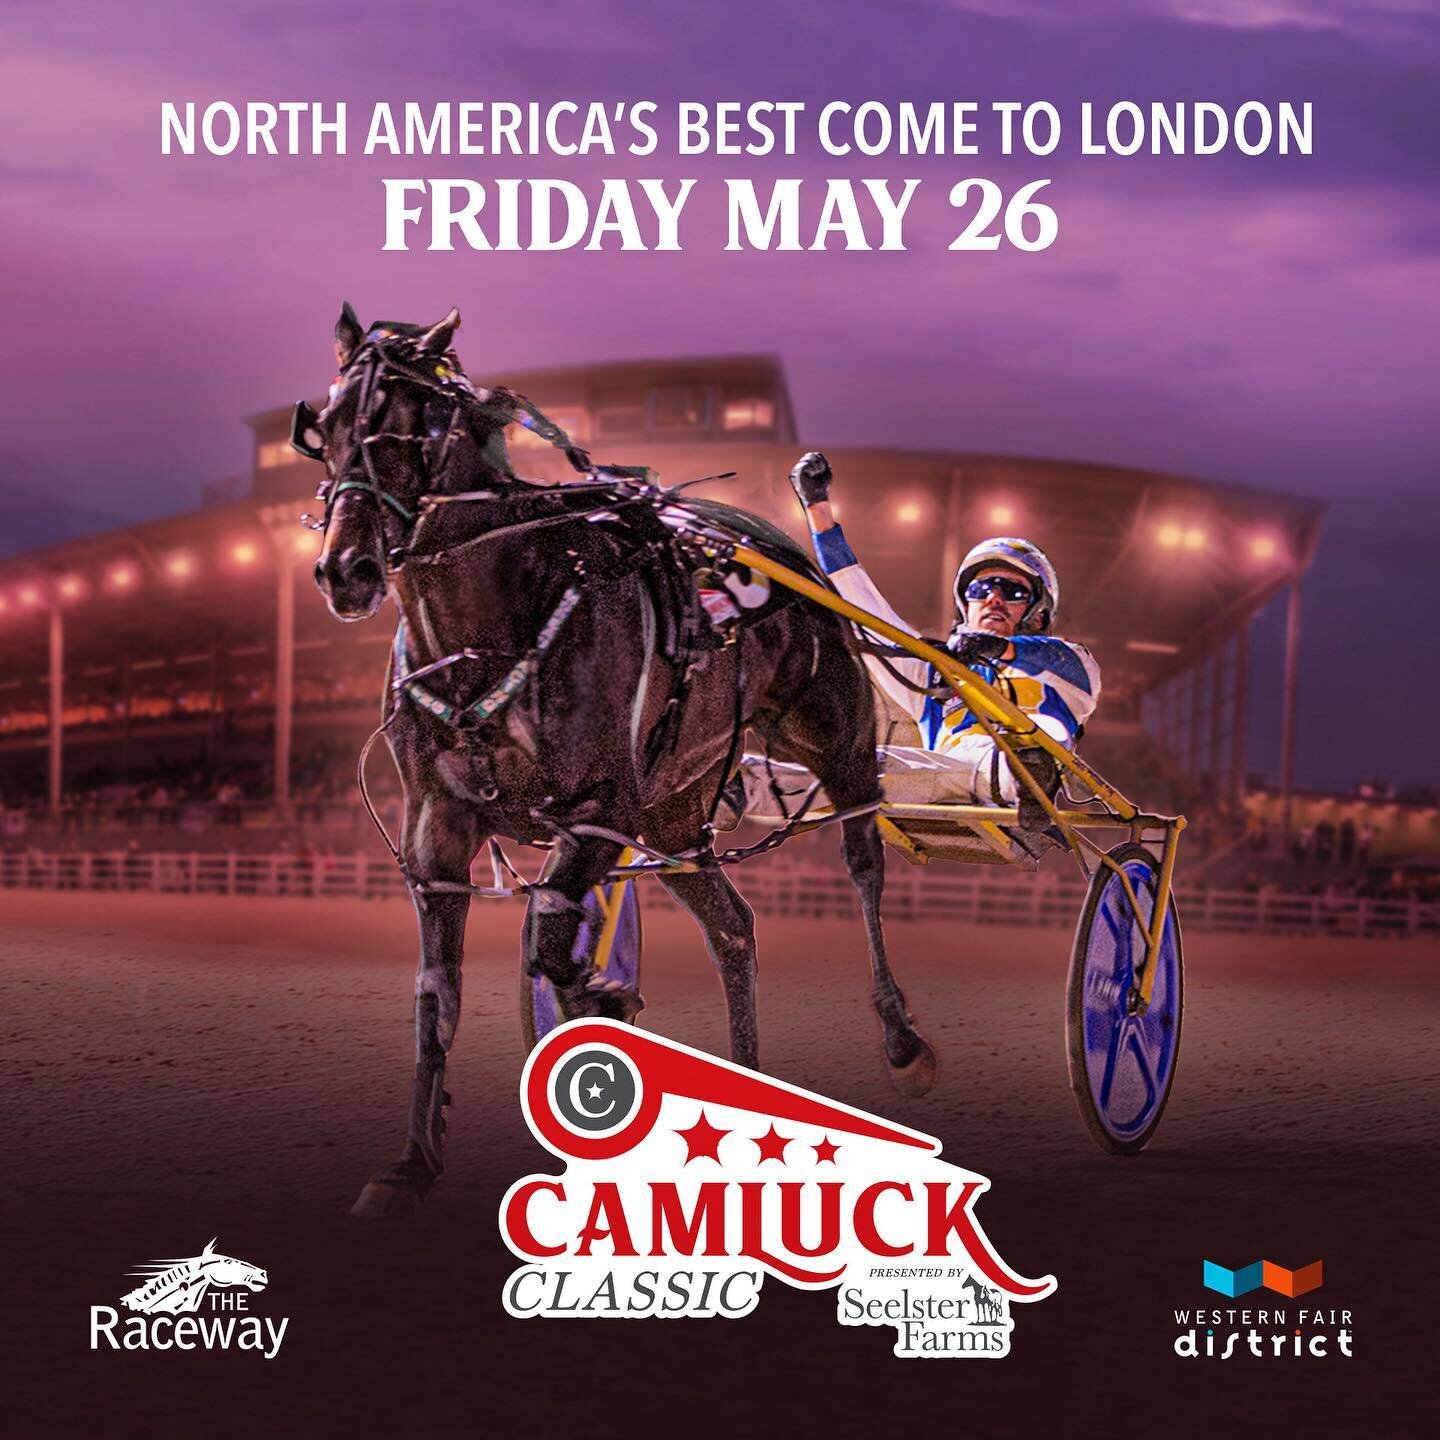 Get Ready for a Night at the Races!

North America&rsquo;s Best come to London on Friday May 26th for the annual Camluck Classic presented by Seelster Farms! 

The evening will feature an exceptional calibre of horses and drivers as they compete for 